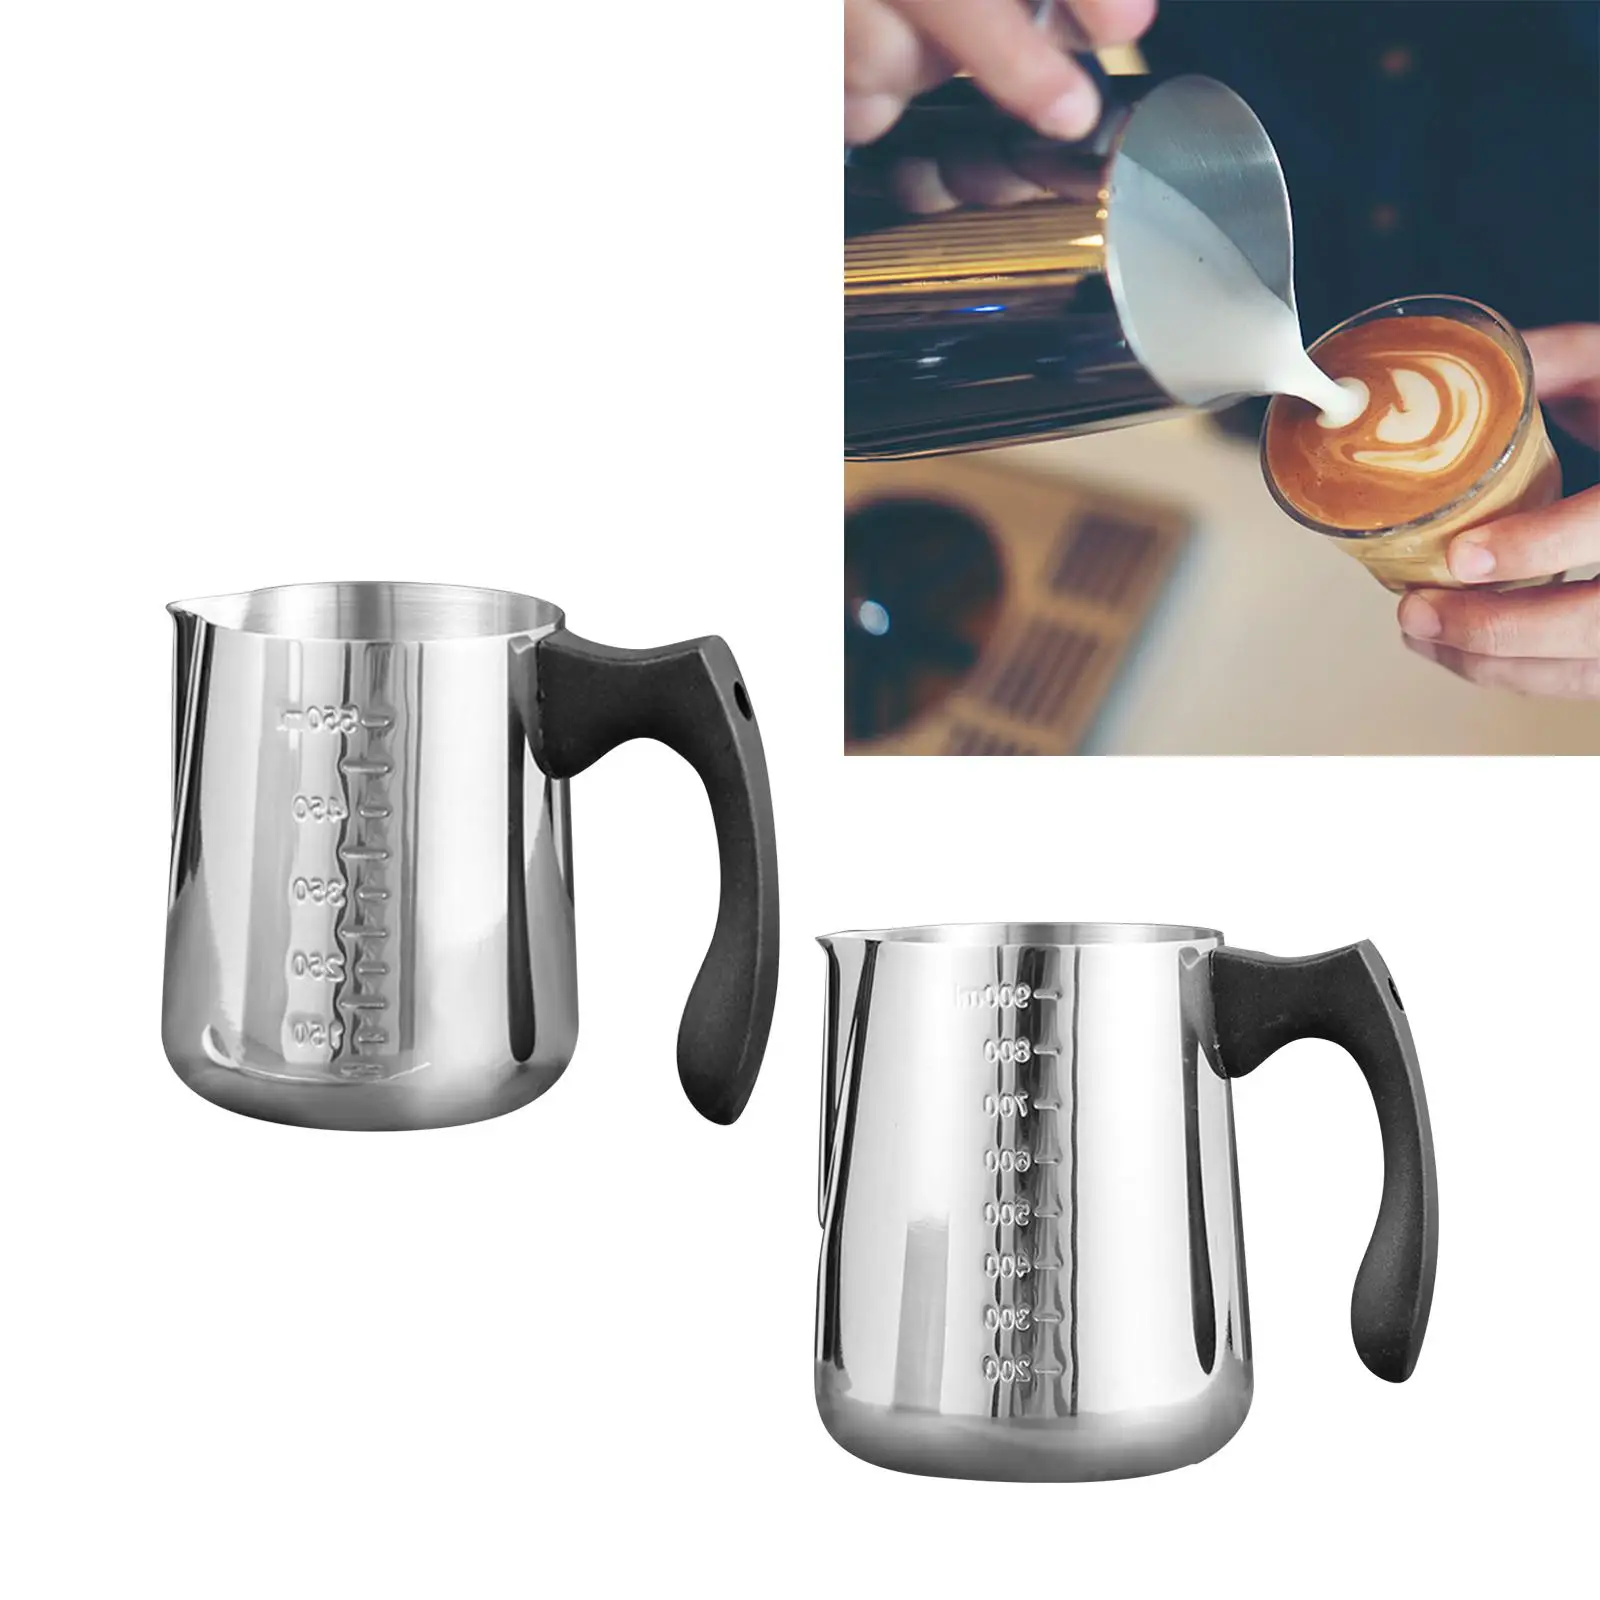 Multifunctional Milk Frothing Mug Barista Steam Mugs Espresso Steaming Cups Milk Jug Cup Coffeware for Holiday Party Kitchen